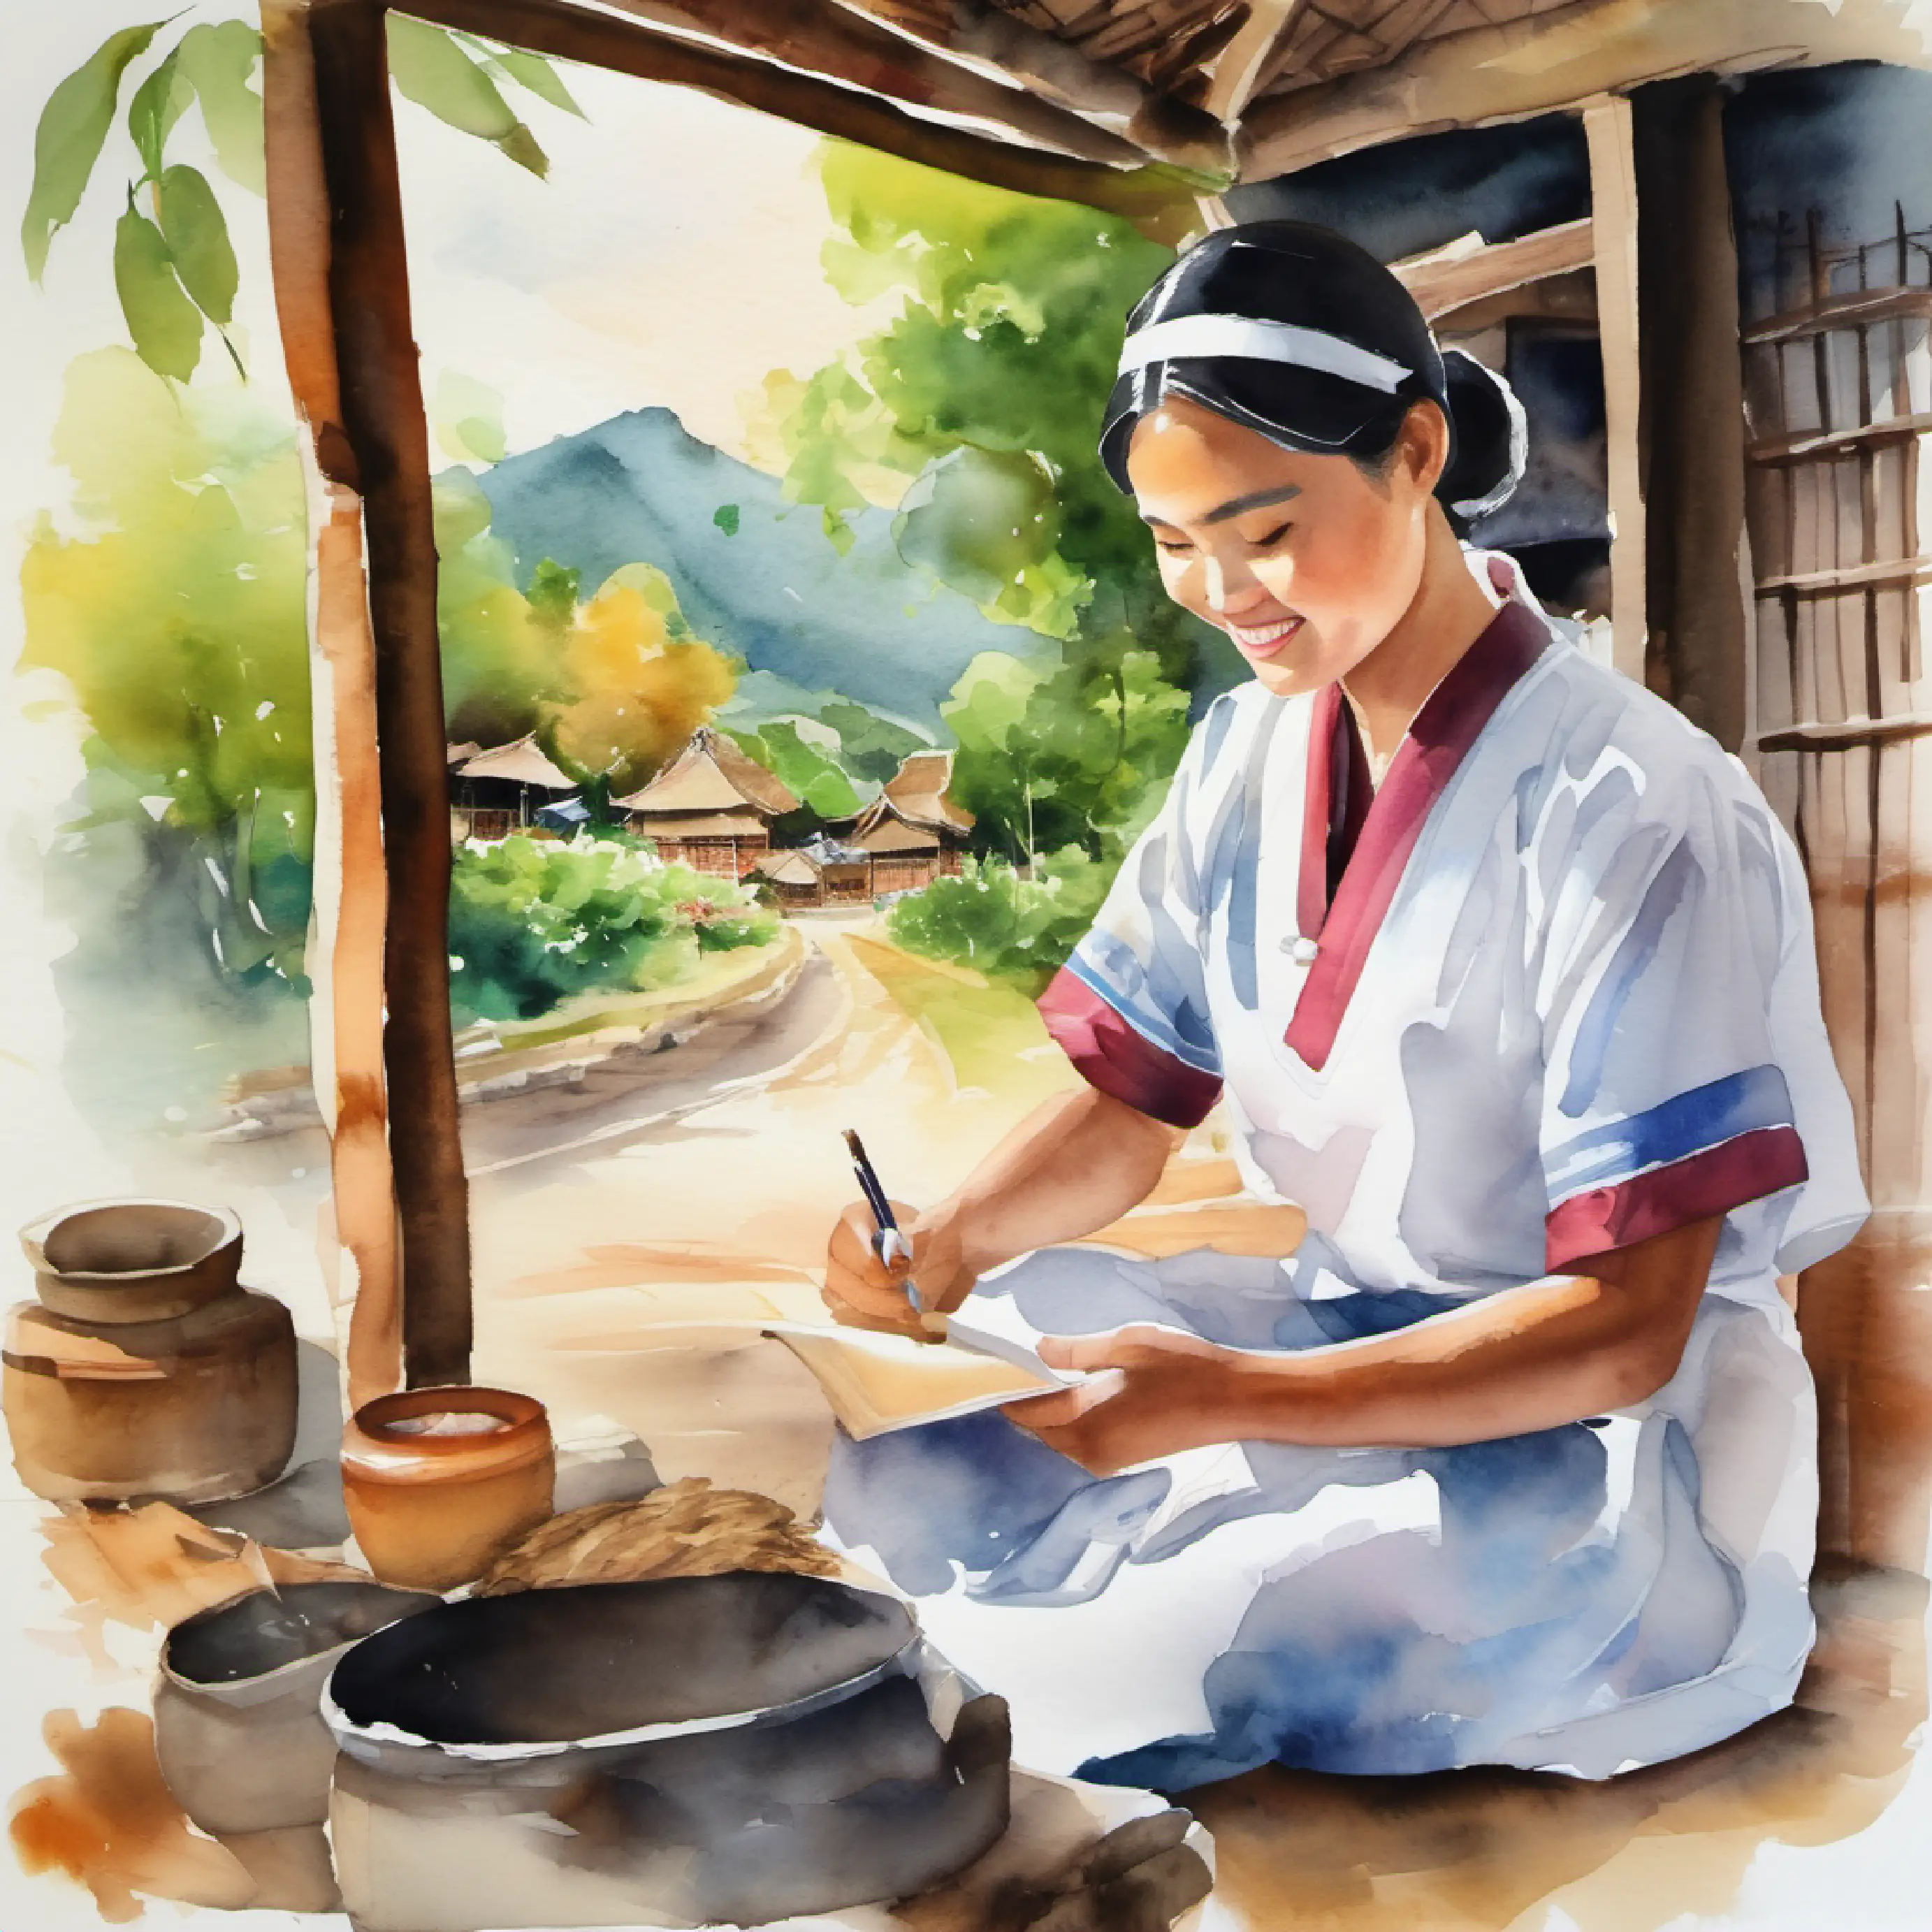 Introduction to Young doctor with healing hands, kind eyes, warm smile, Thai village setting.